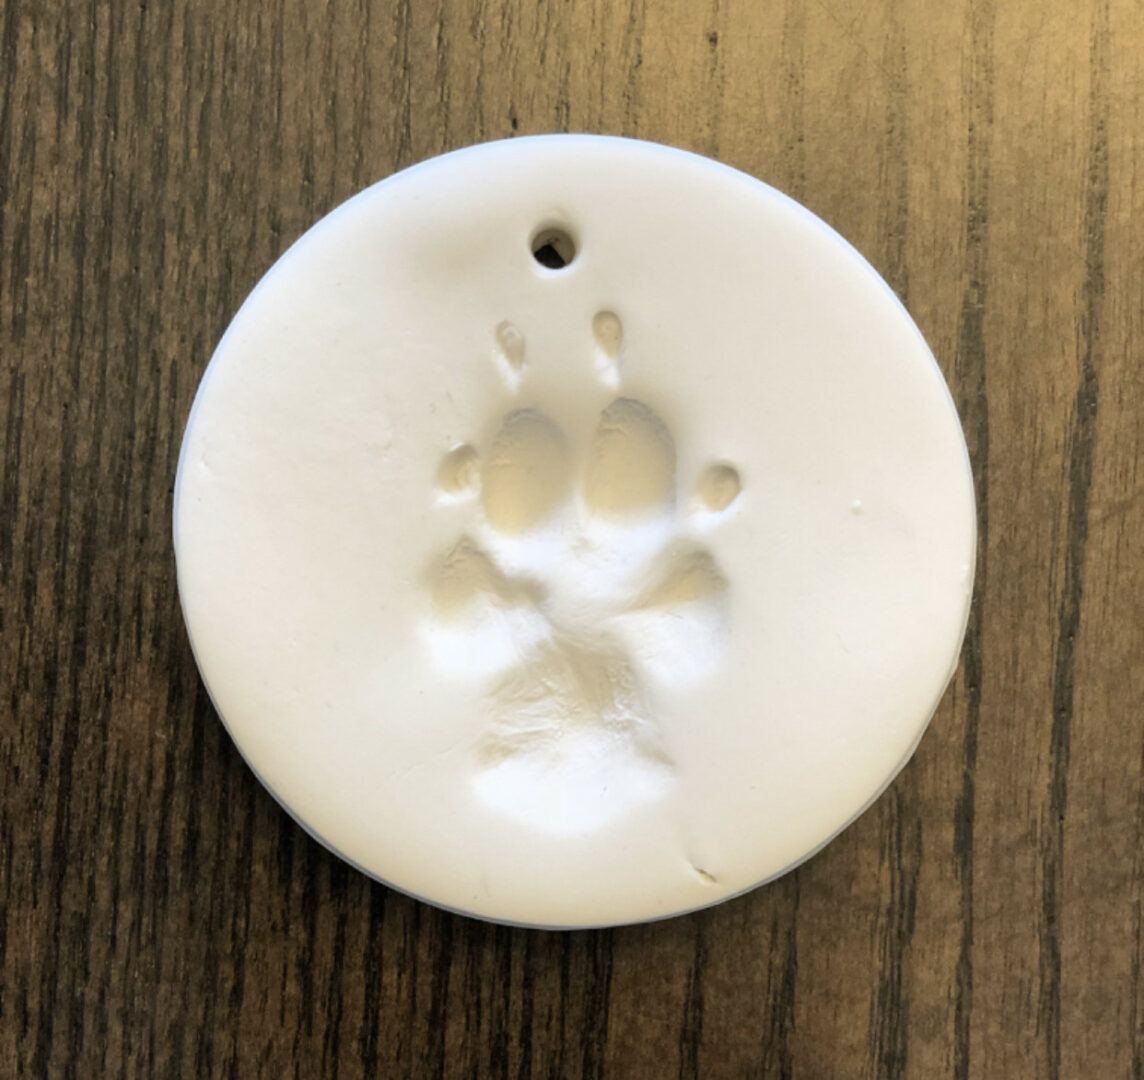 A white clay ornament with a dog paw print.